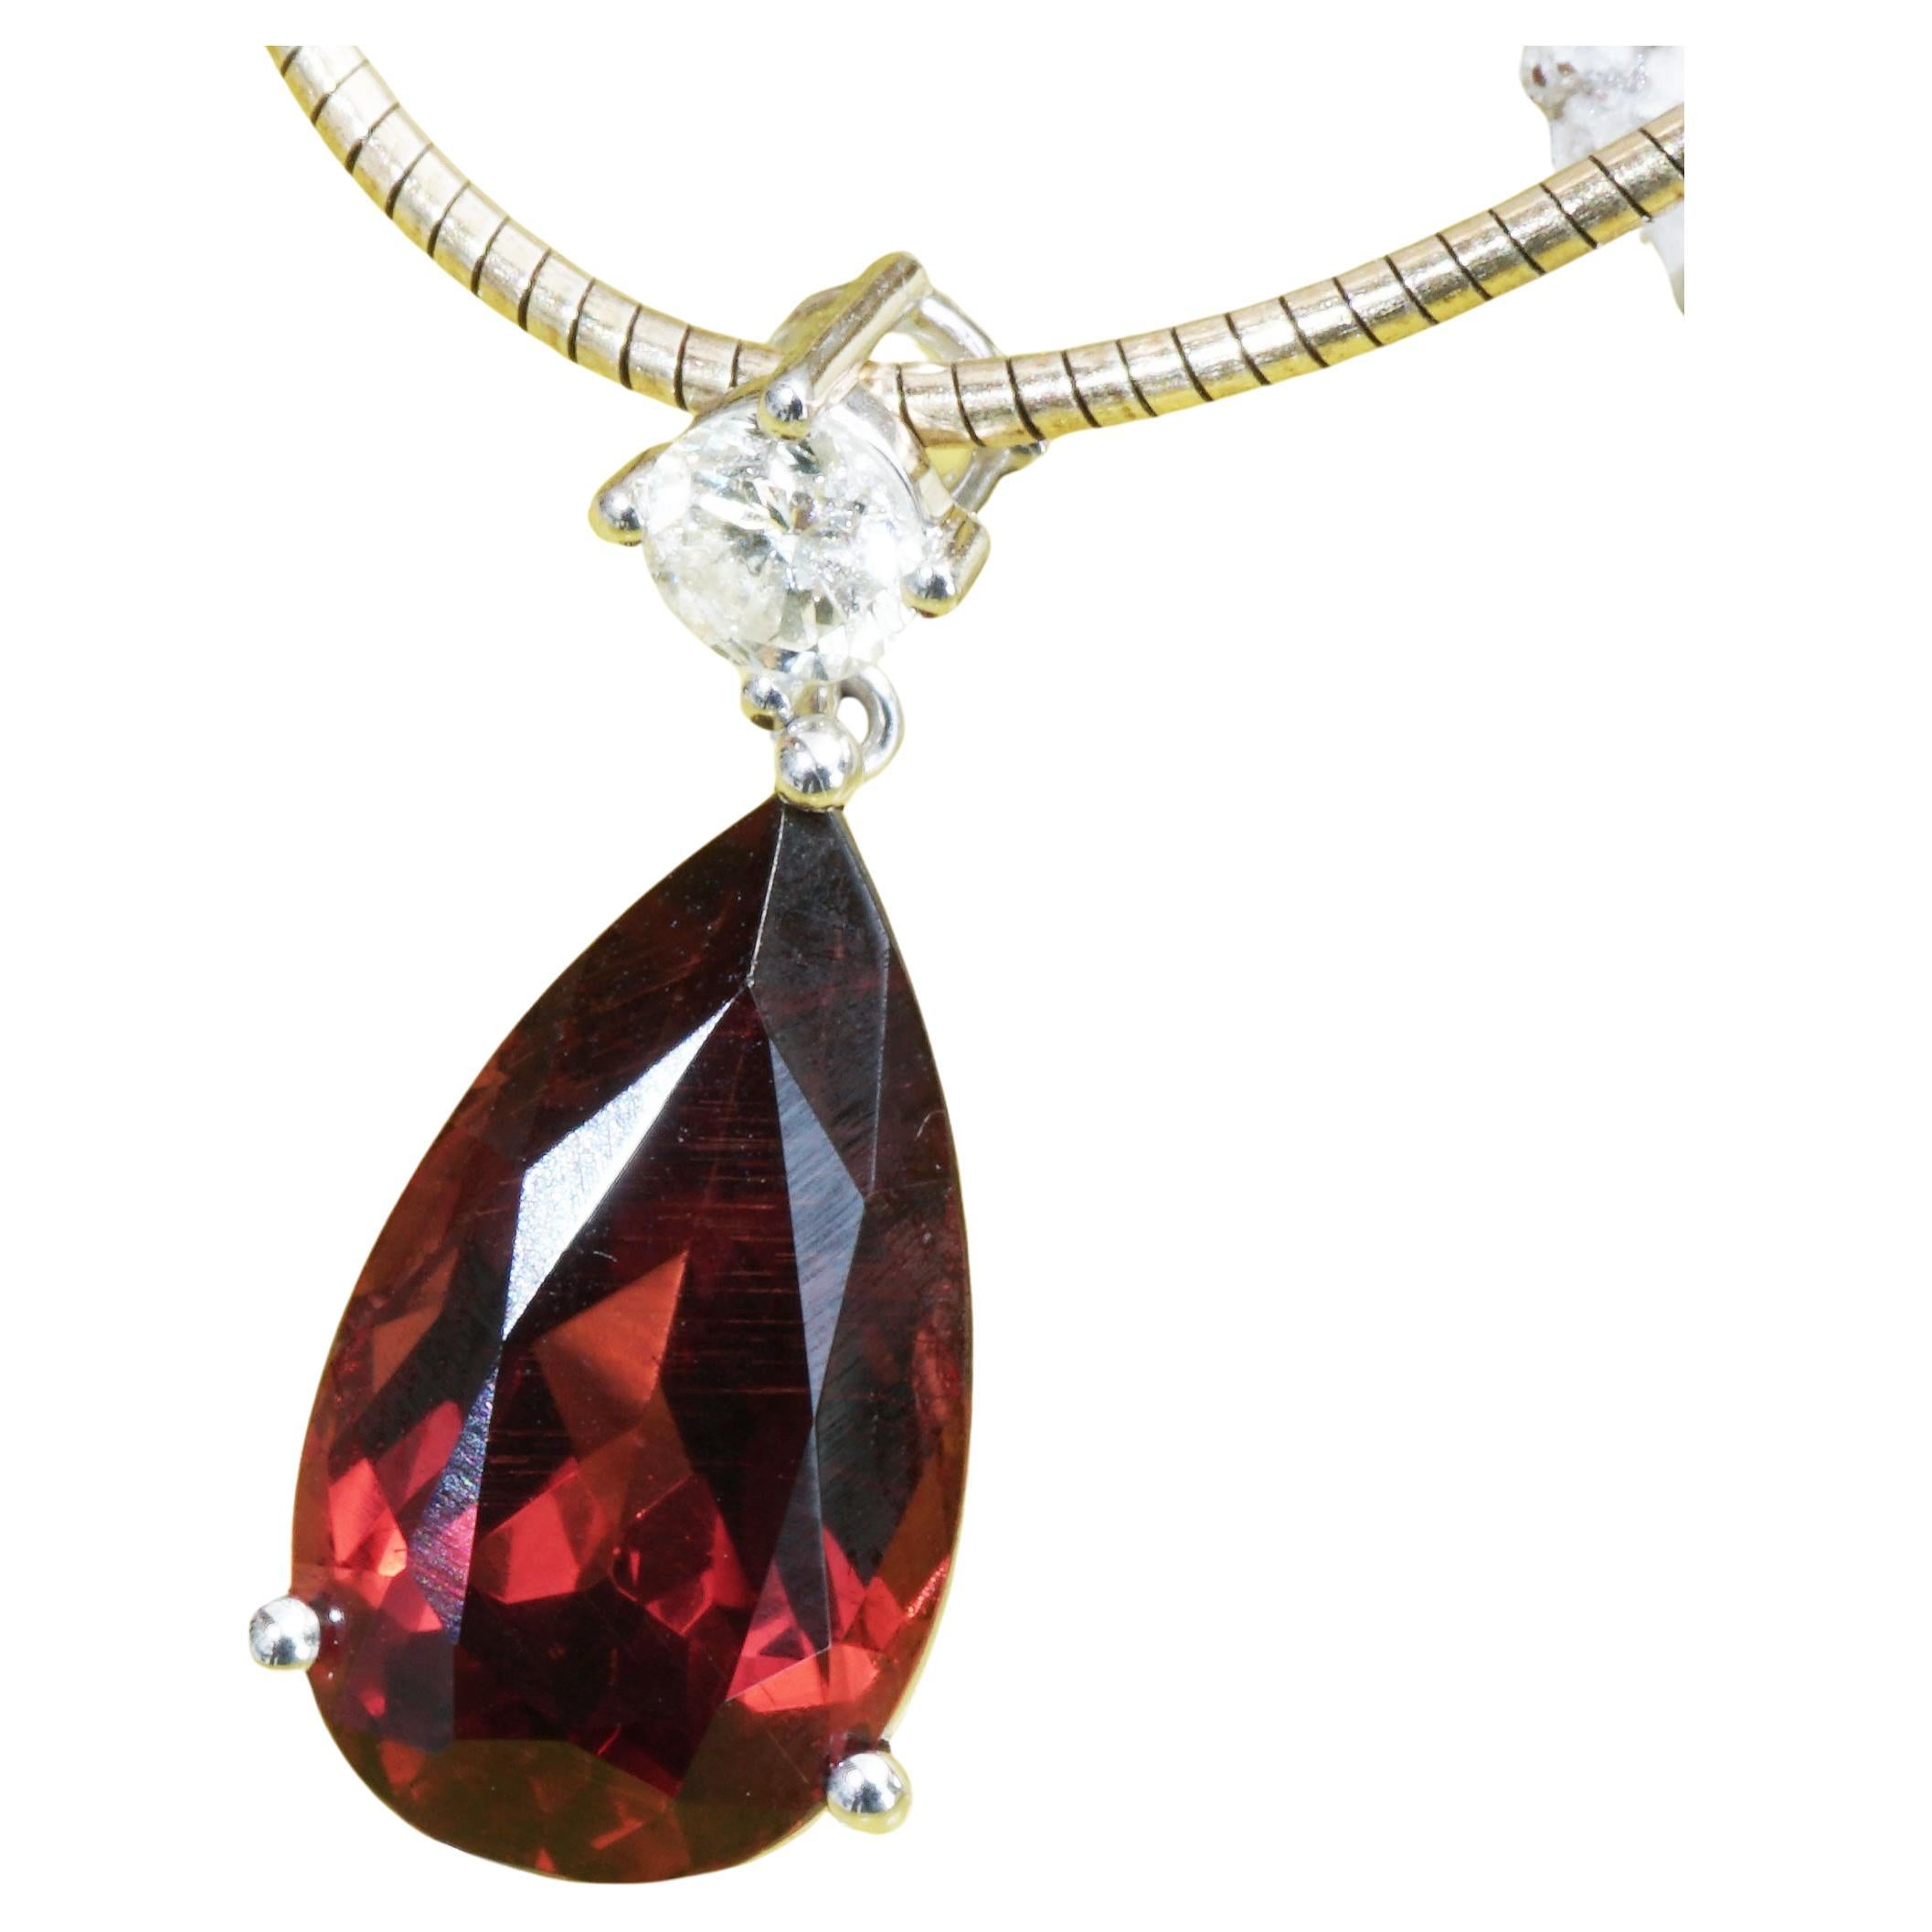 one top color great red-violet tone and a beautiful brilliant and nothing else, puristic and yet so noble, results in a 18 kt white gold pendant that can be worn daily, on a chain, an Omega choker or with leather (inner eyelet approx. 2 x 3 mm), a